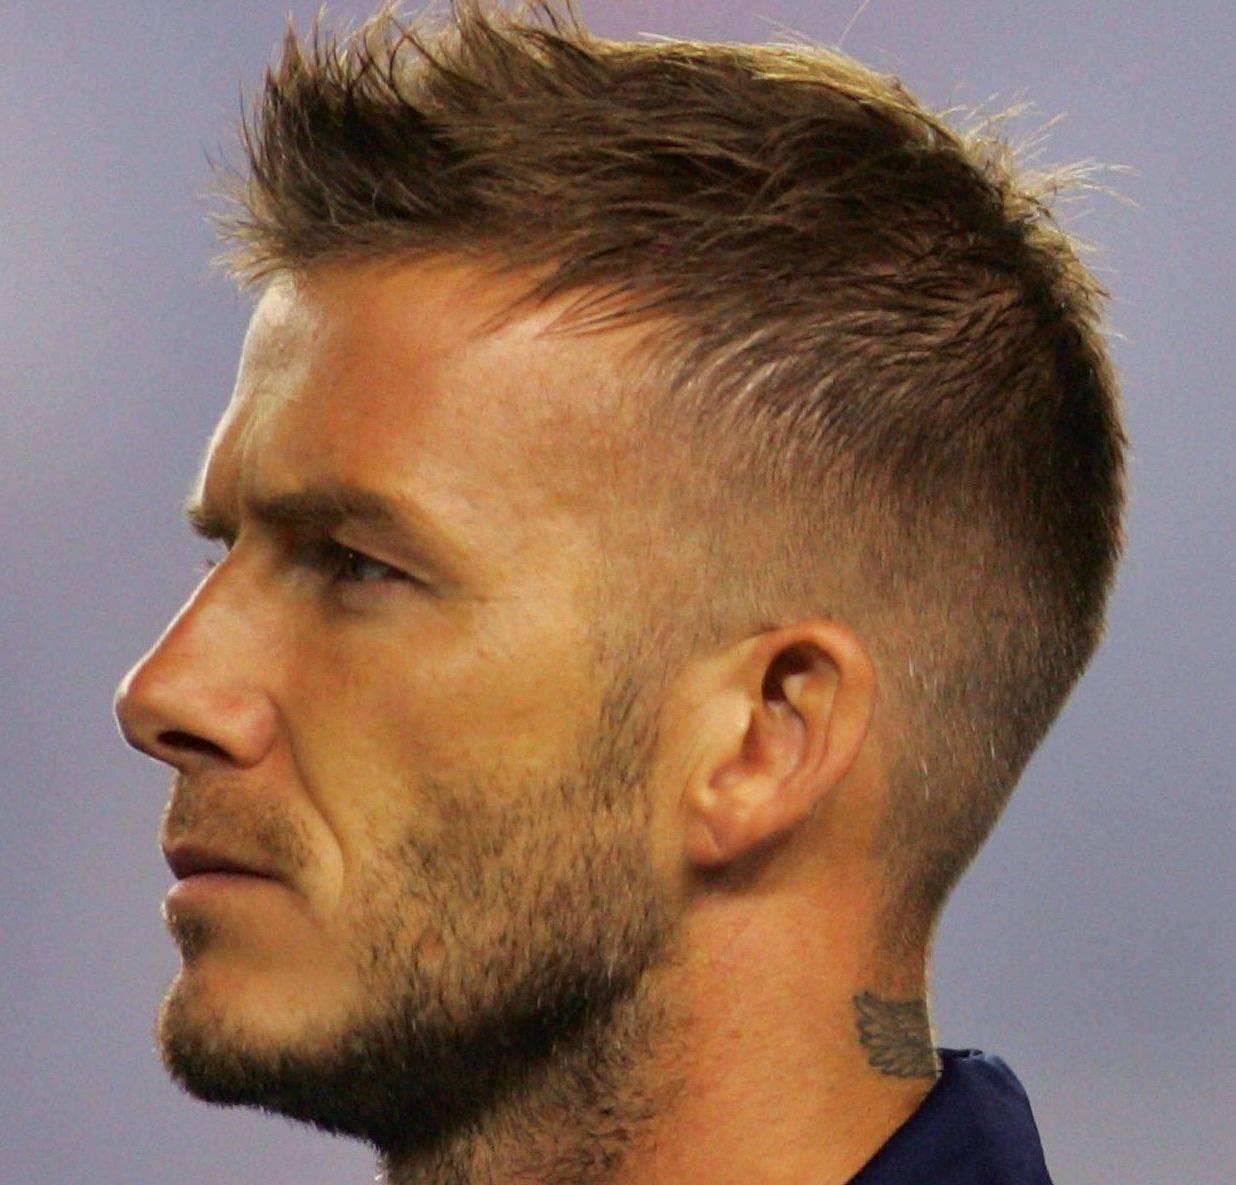 Soccer Haircuts 15 Best Hairstyles For Soccer Players And